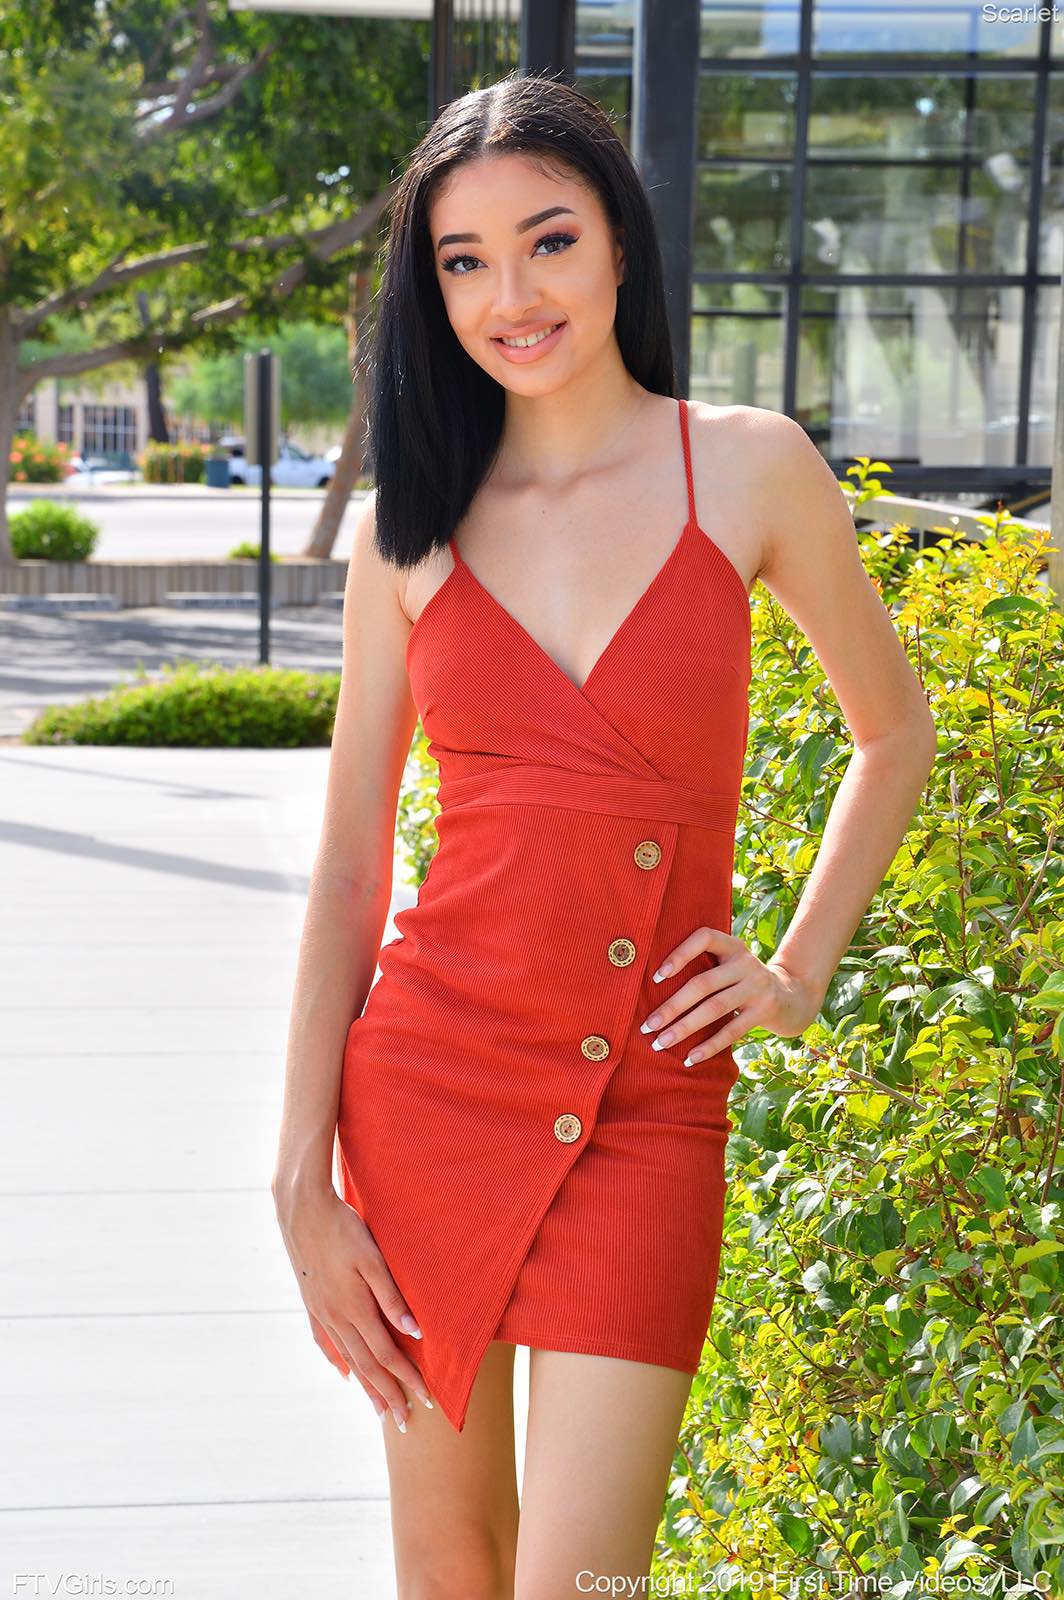 Scarlet in Super Sexy In Red by FTV-Girls (15 nude photos ...